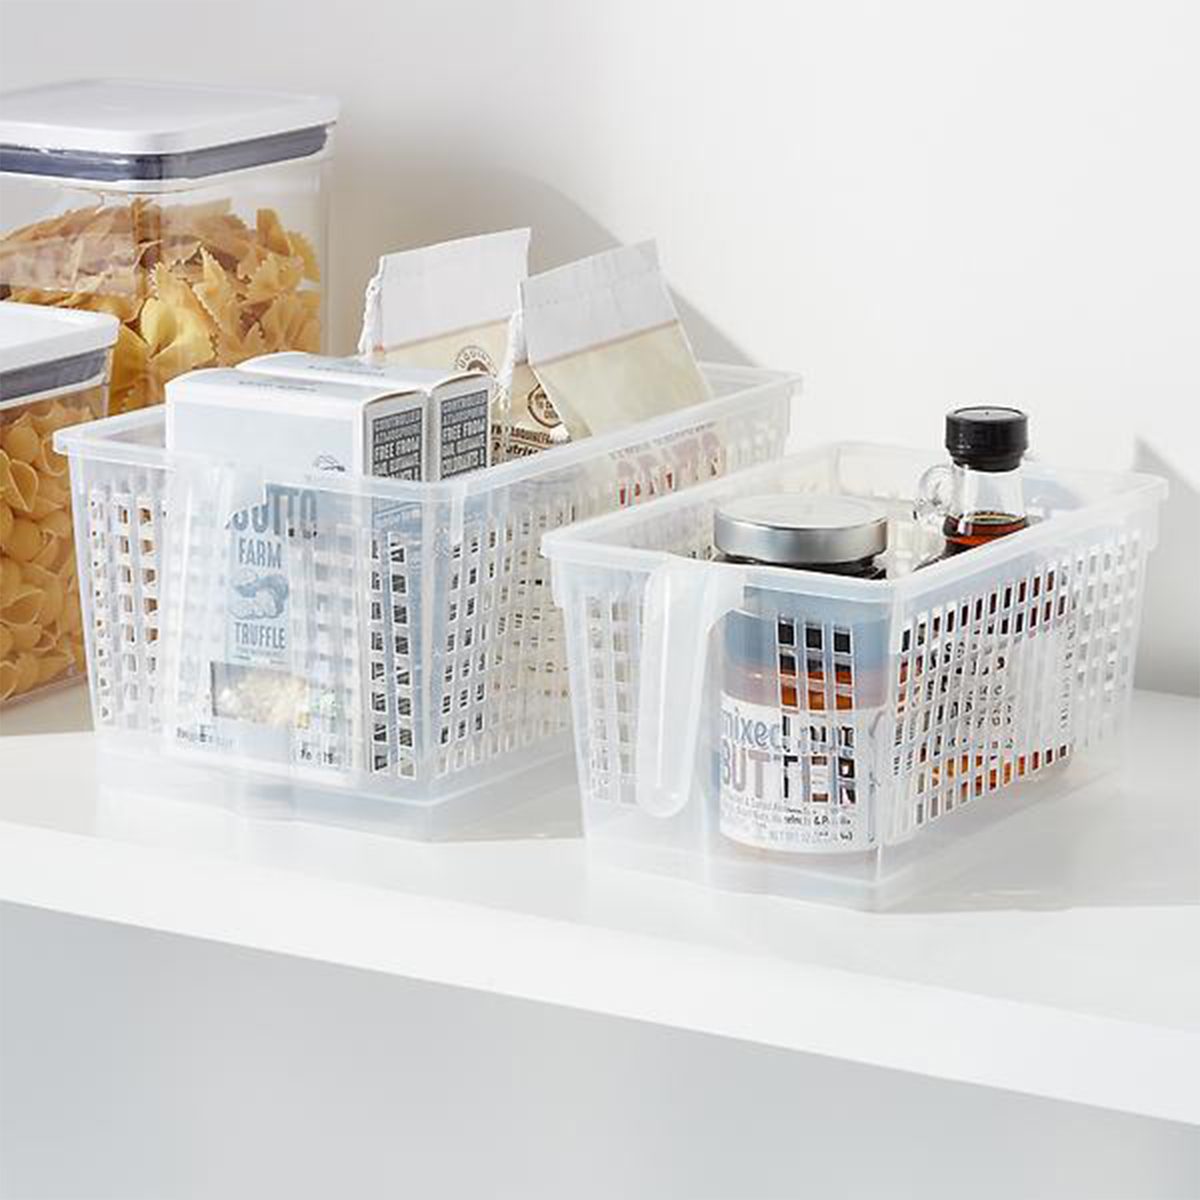 https://www.rd.com/wp-content/uploads/2023/10/Handled-Pantry-Organizer-Storage-Baskets_ecomm_via-containerstore.com_.jpg?fit=700%2C700